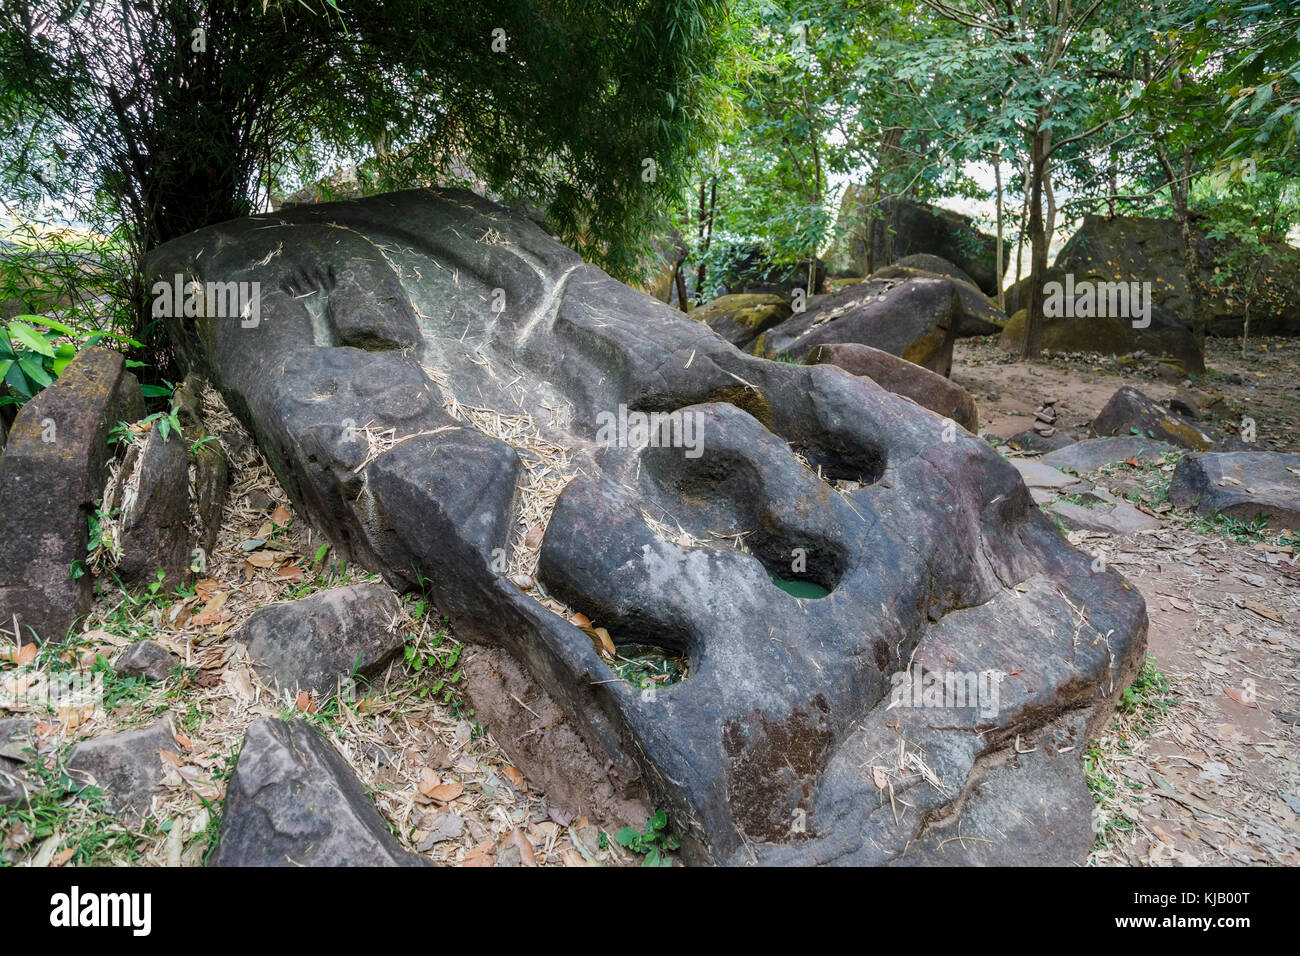 The Crocodile Stone at the ancient ruins of the pre-Angkorian Khmer Hindu (now Buddhist) temple of Wat Phou, Champasak Province, Laos, southeast Asia Stock Photo